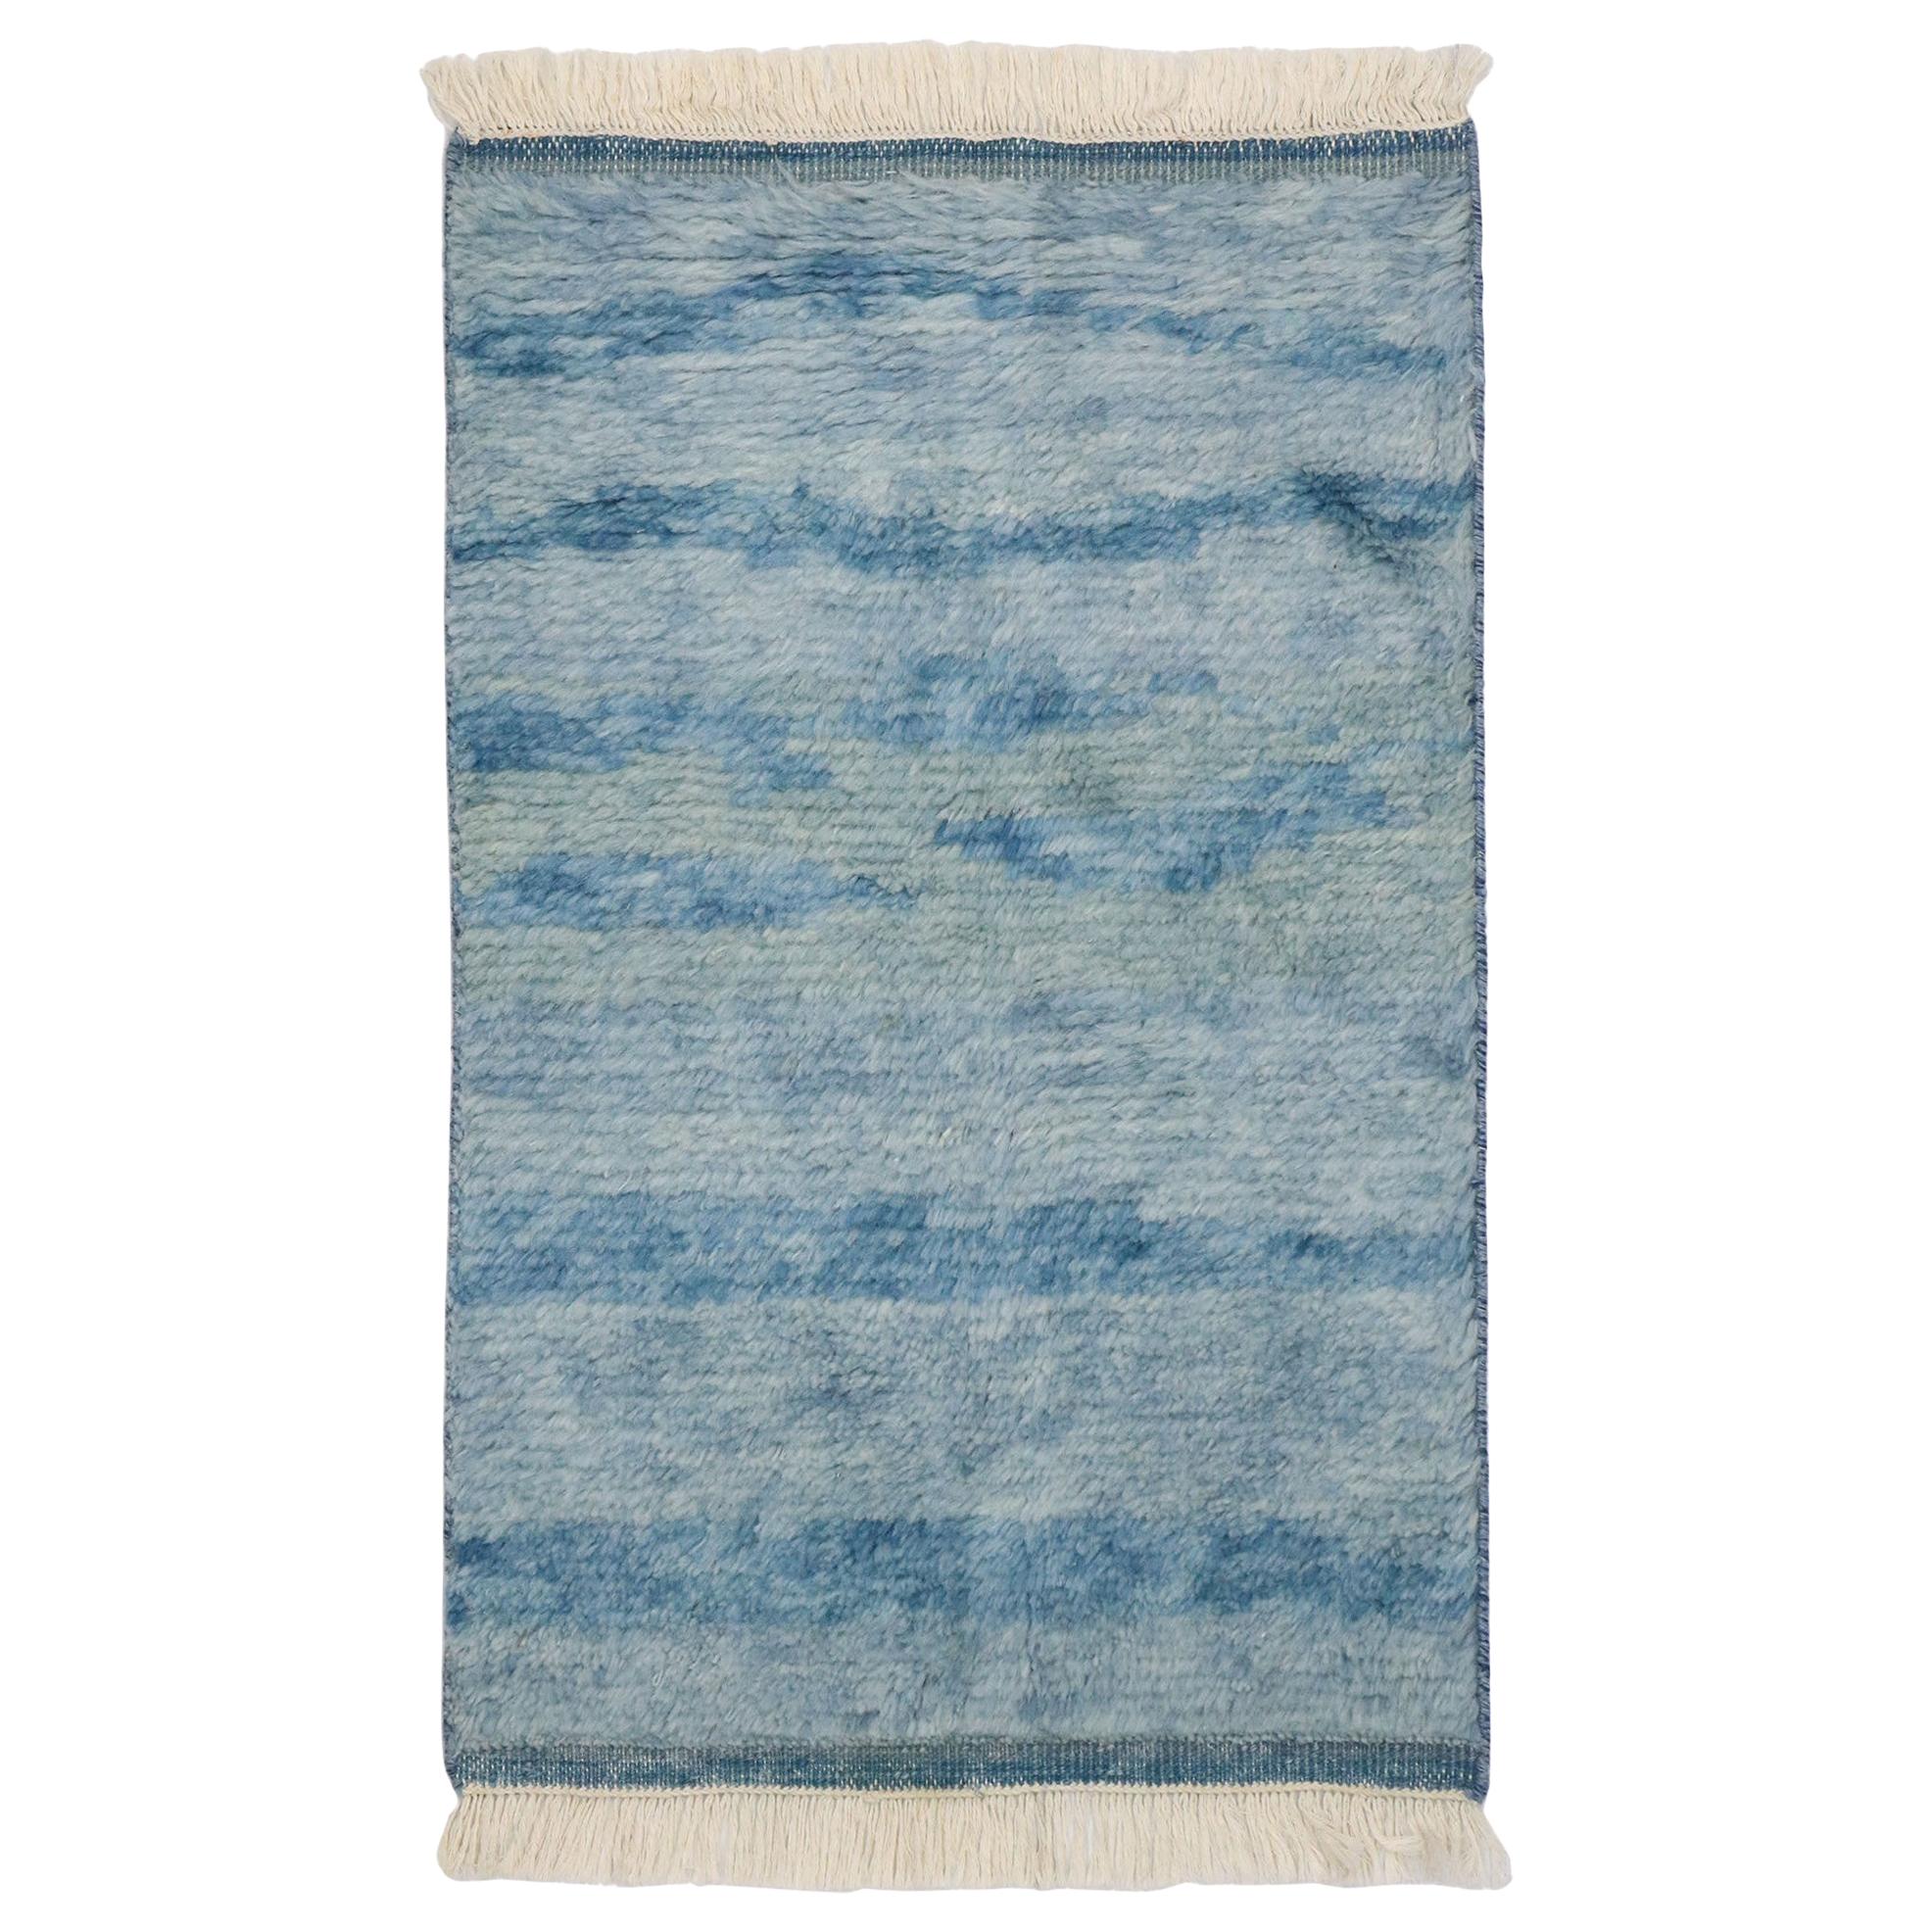 New Contemporary Moroccan Beach Rug with Modern Coastal Style